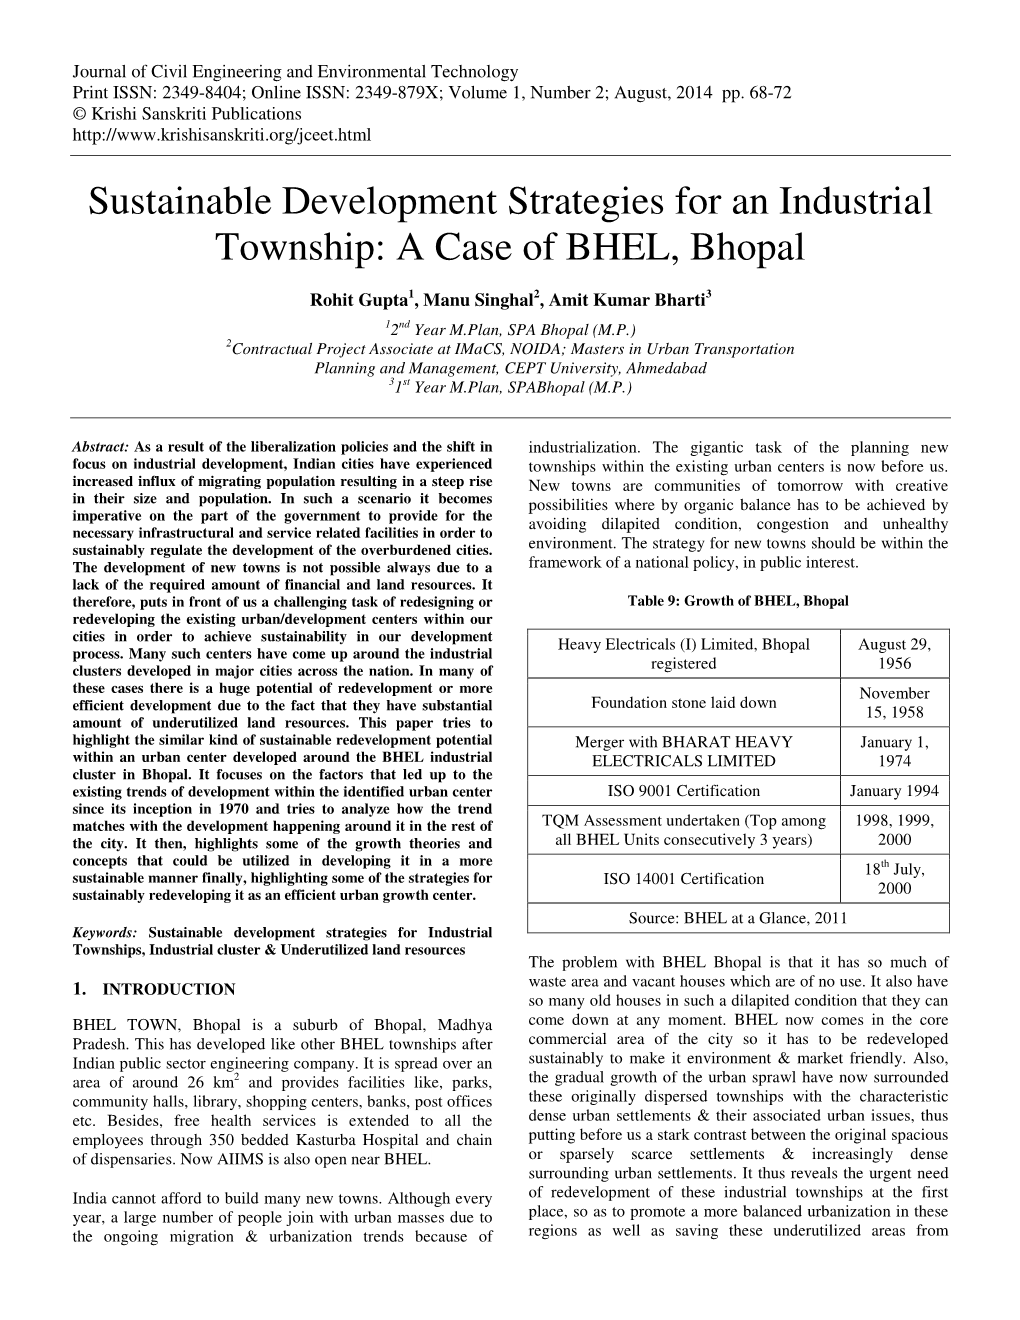 Sustainable Development Strategies for an Industrial Township: a Case of BHEL, Bhopal